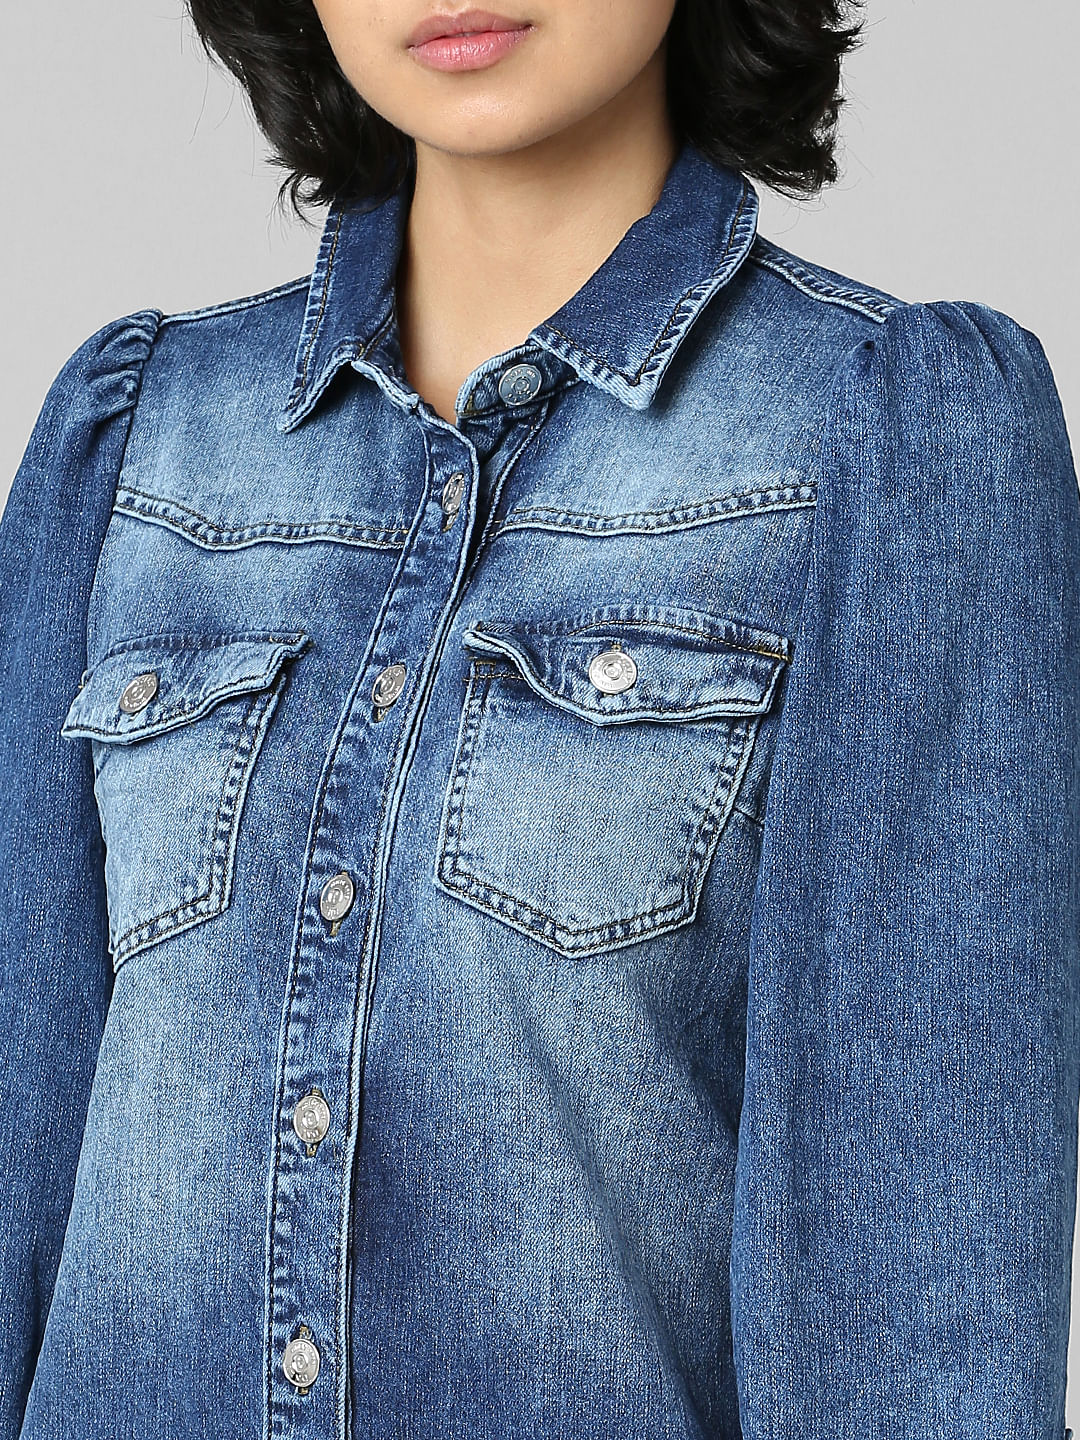 What To Wear With A Denim Shirt + Chambray Shirt Outfits - Truly Destiny